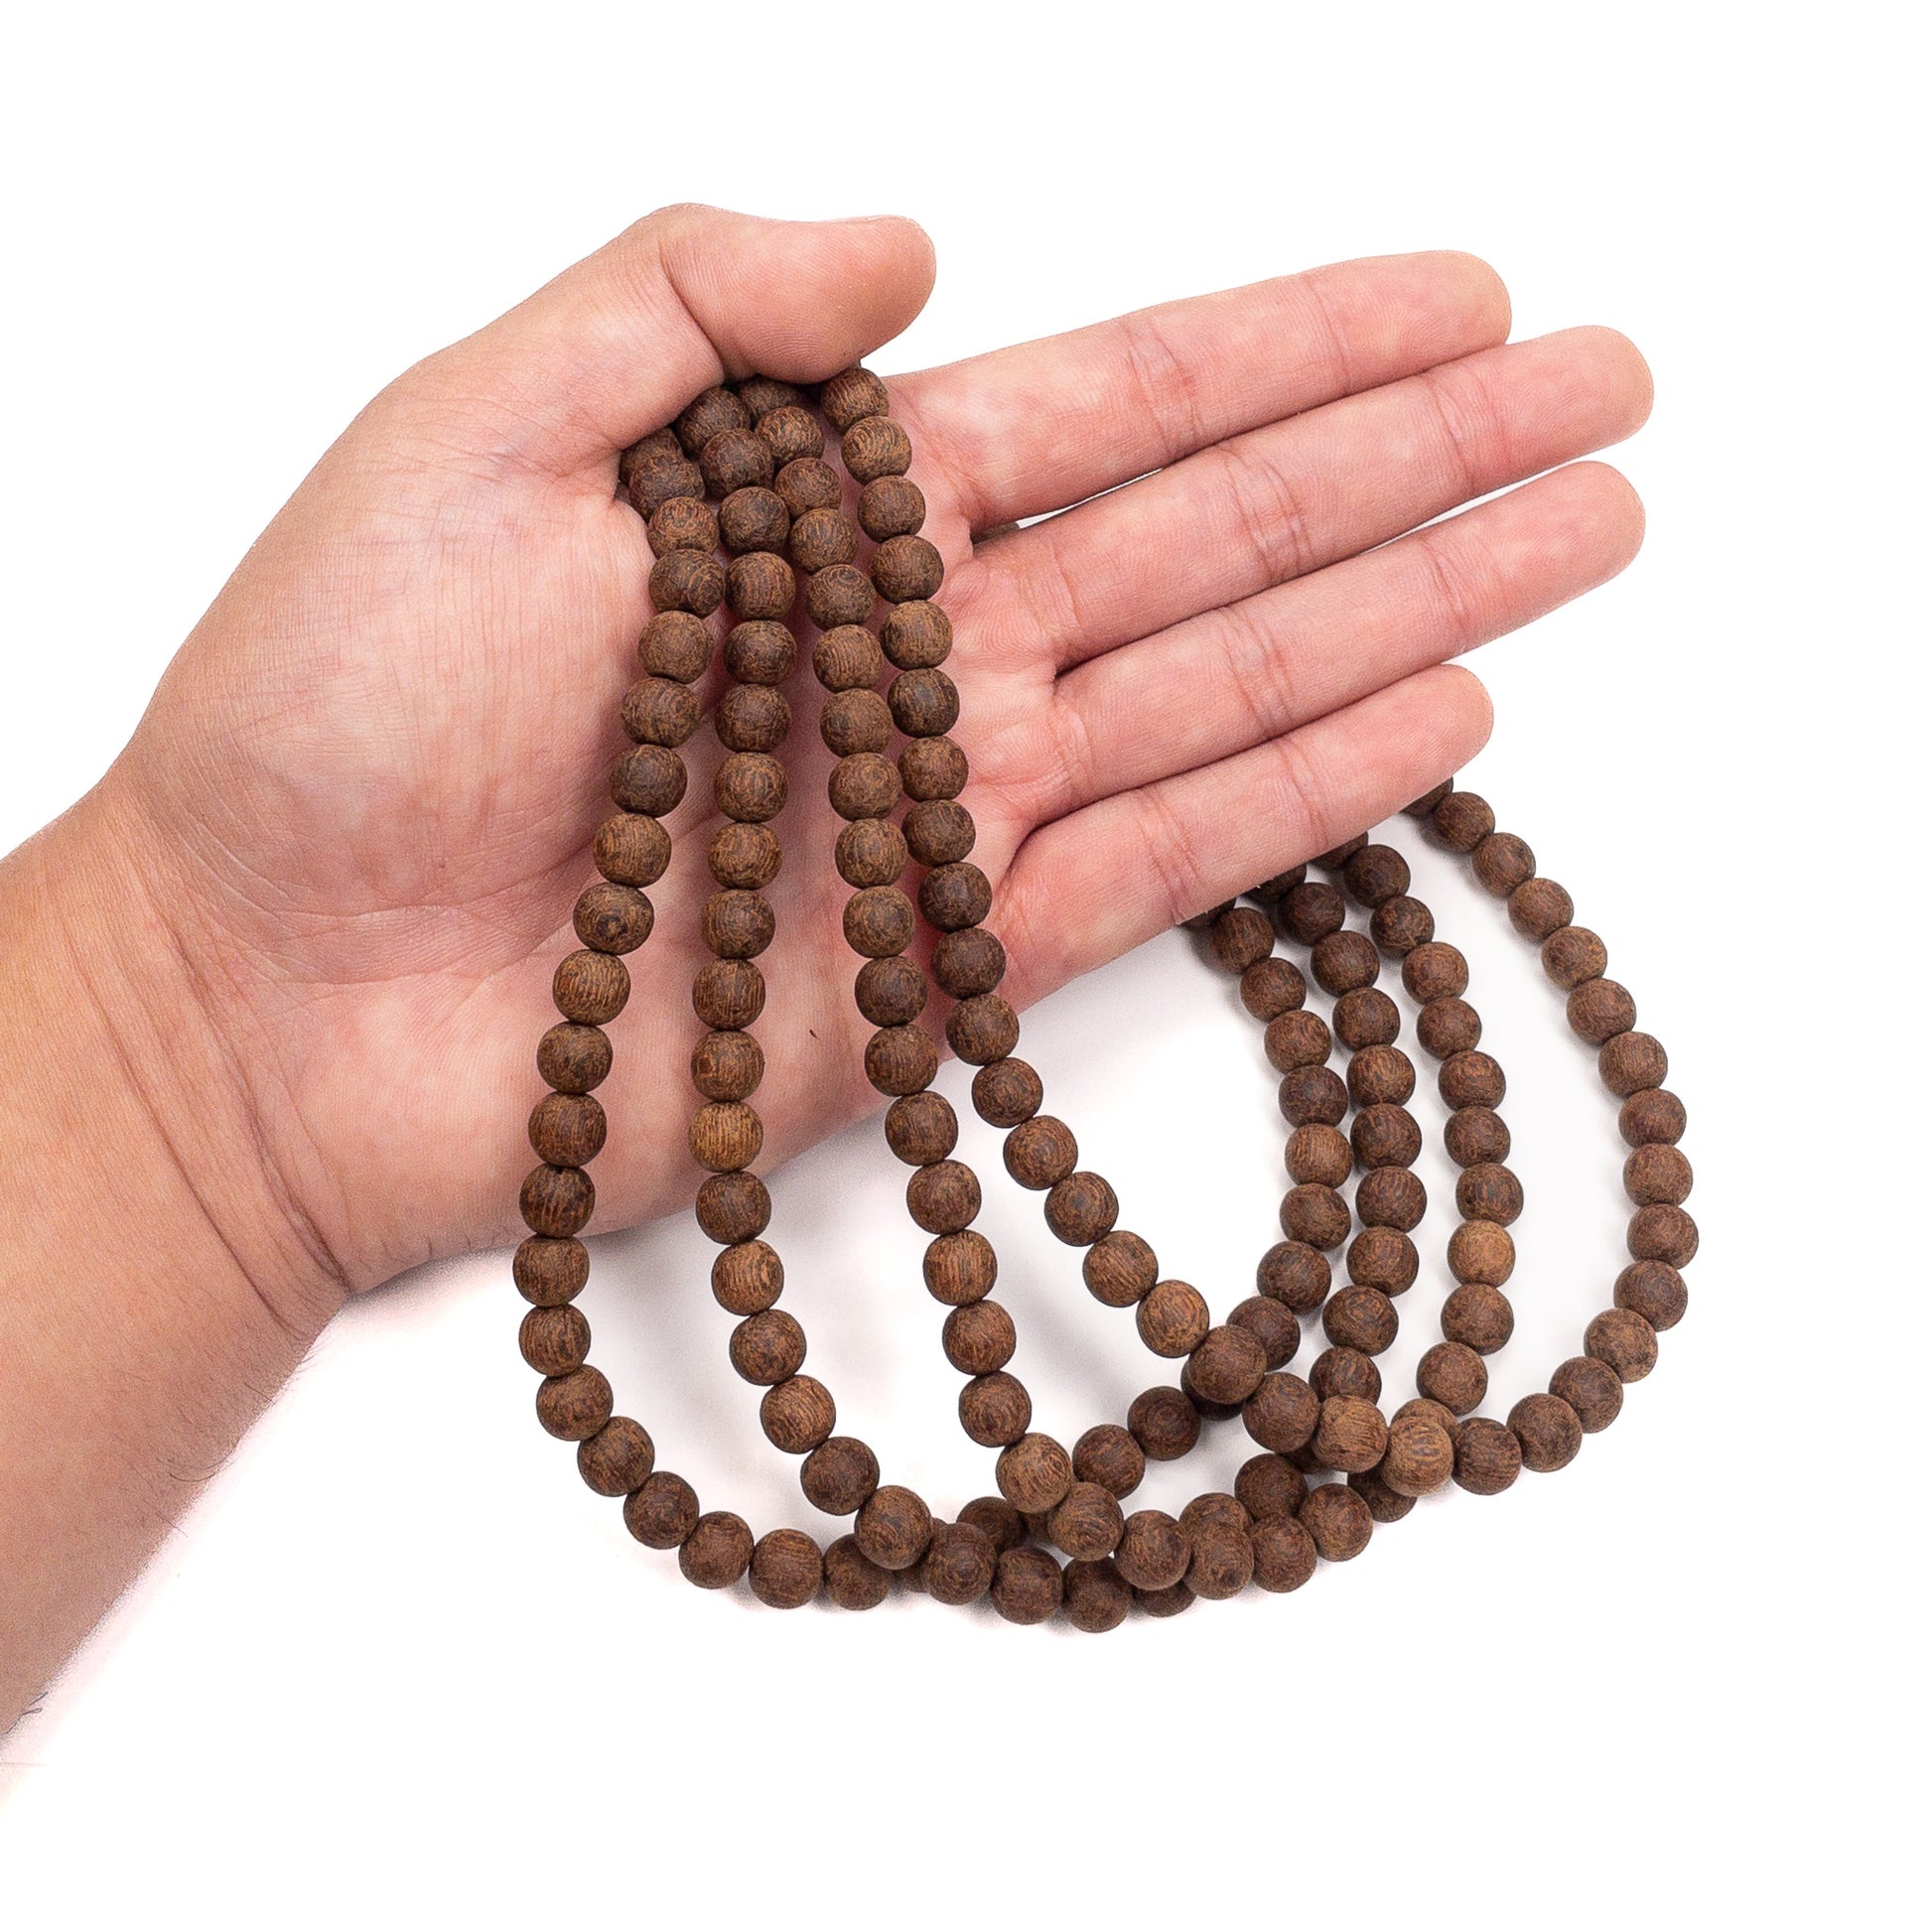 Madre de Cacao Wood Matte Finish 8mm Round Bead - 16" Strand